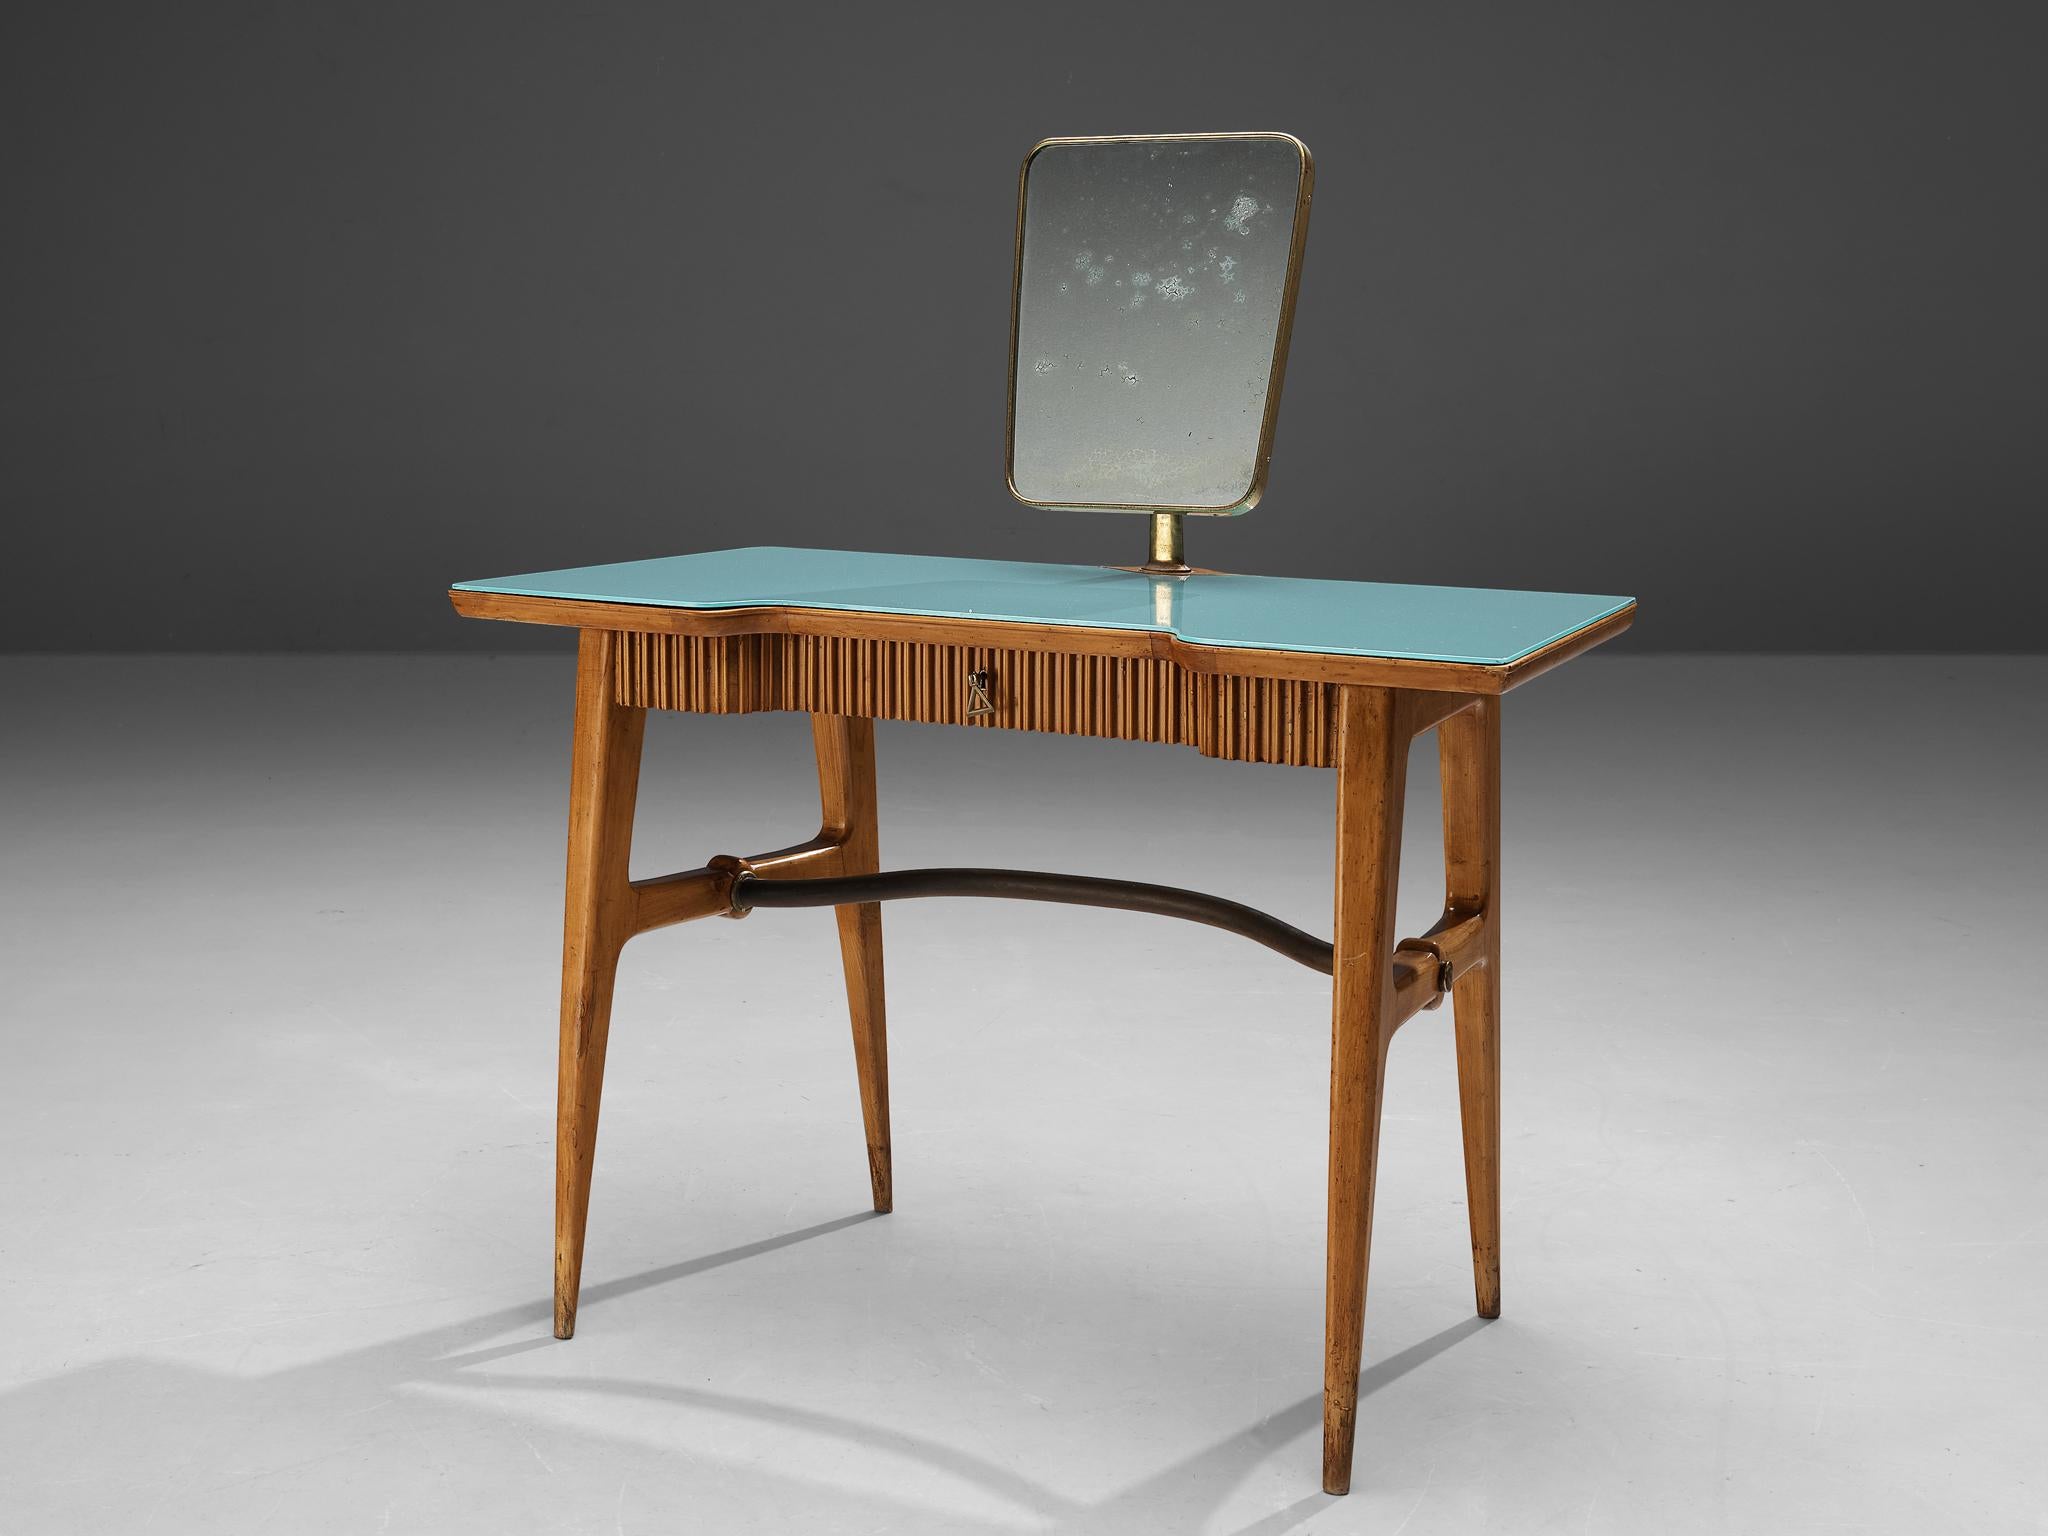 Vanity table, cherry, lacquered ash, brass, glass, leatherette, Italy, 1940s.

Luxurious vanity table designed in the manner of Gio Ponti´s characteristic style. The table is executed in warm cherry wood and contains a turquoise colored glass top,